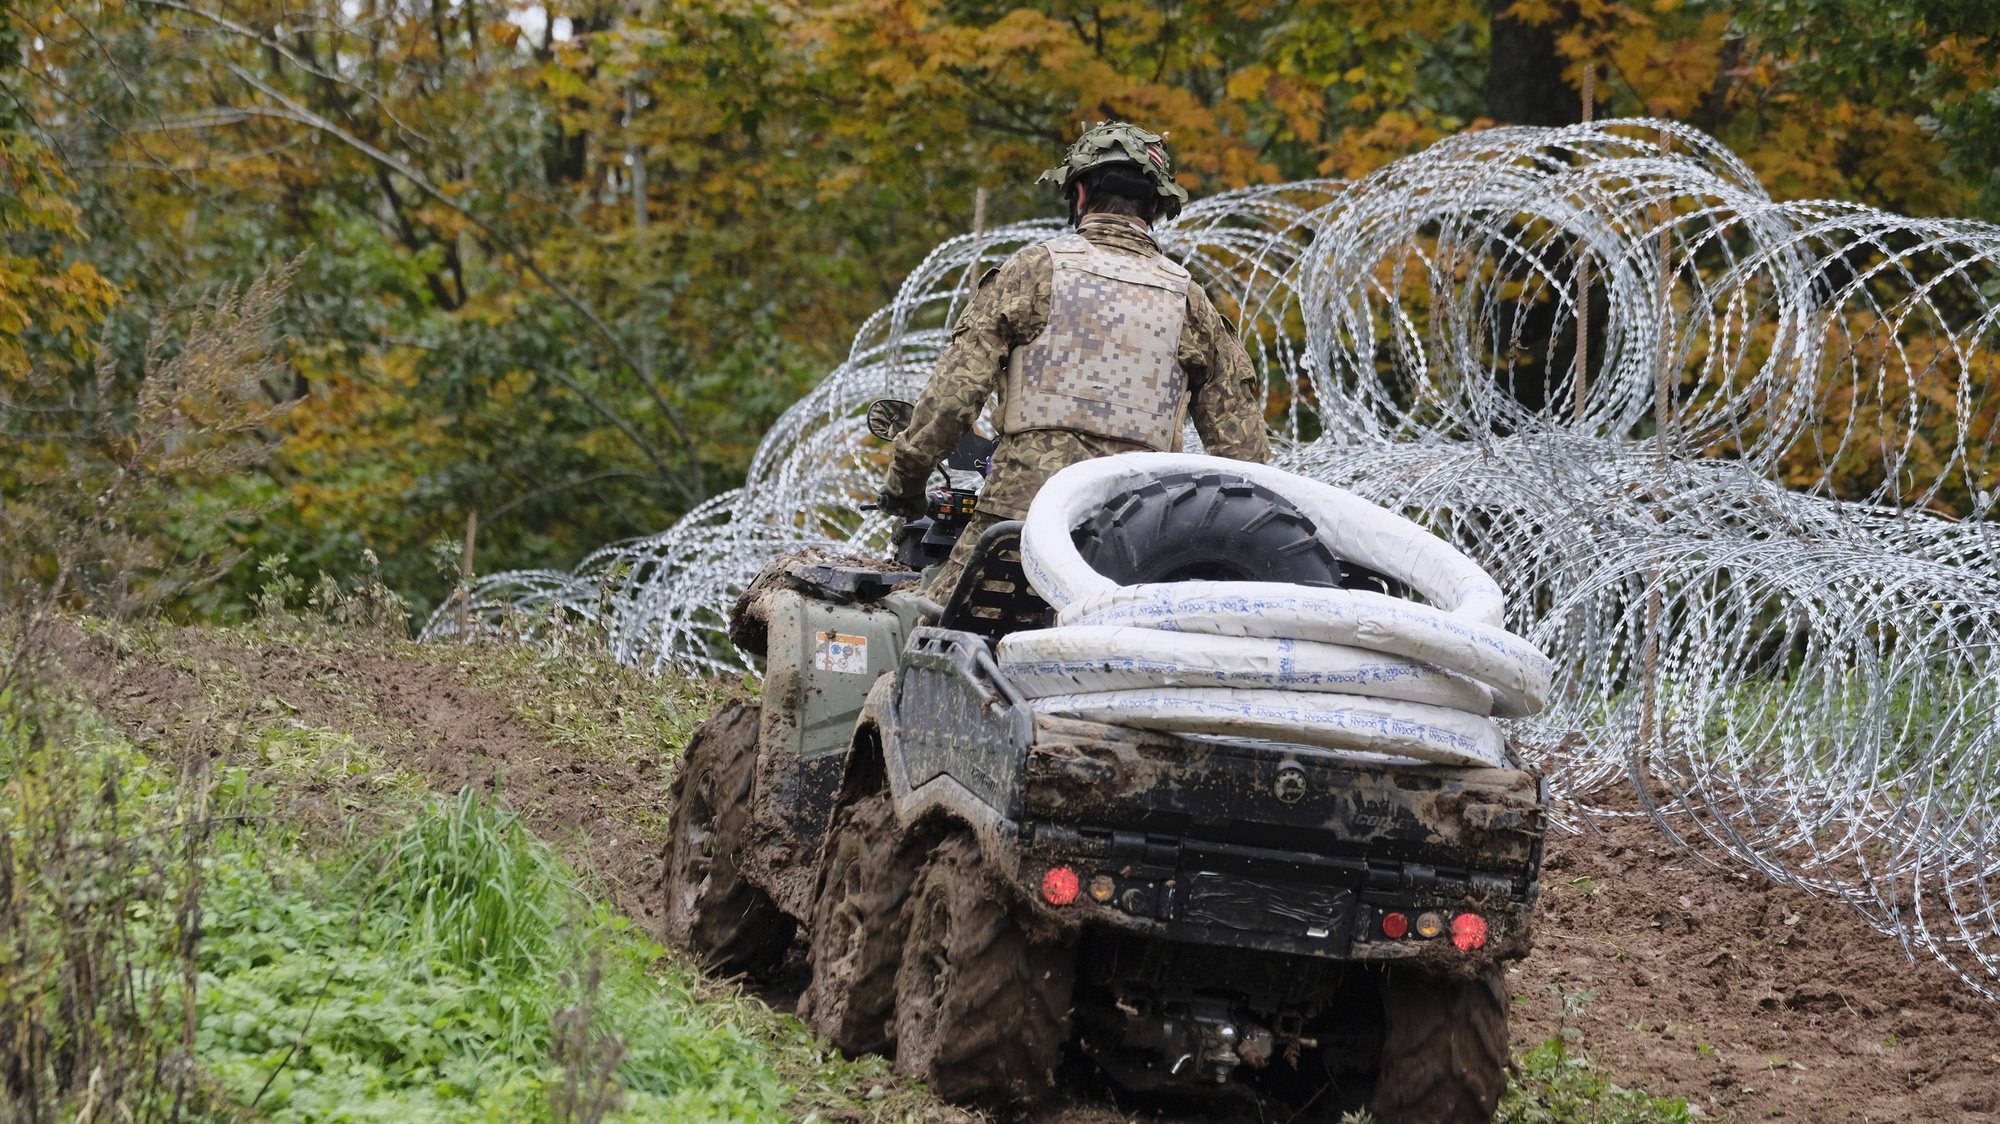 epa09493122 A soldier of Latvian National Armed Forces (NAF) patrols along a new barbed wire fence, donated by the Slovenian Ministry of Defense, on the state border with Belarus in Kraslava region, Latvia, 28 September 2021. This fence will cover the most critical border areas. Since August 10, a total of about 850 people have been reportedly deterred from crossing the state border illegally. According to the officials of Latvia, Lithuania and Poland, the pressure of migrants on the border is organized by Belarus.  EPA/VALDA KALNINA